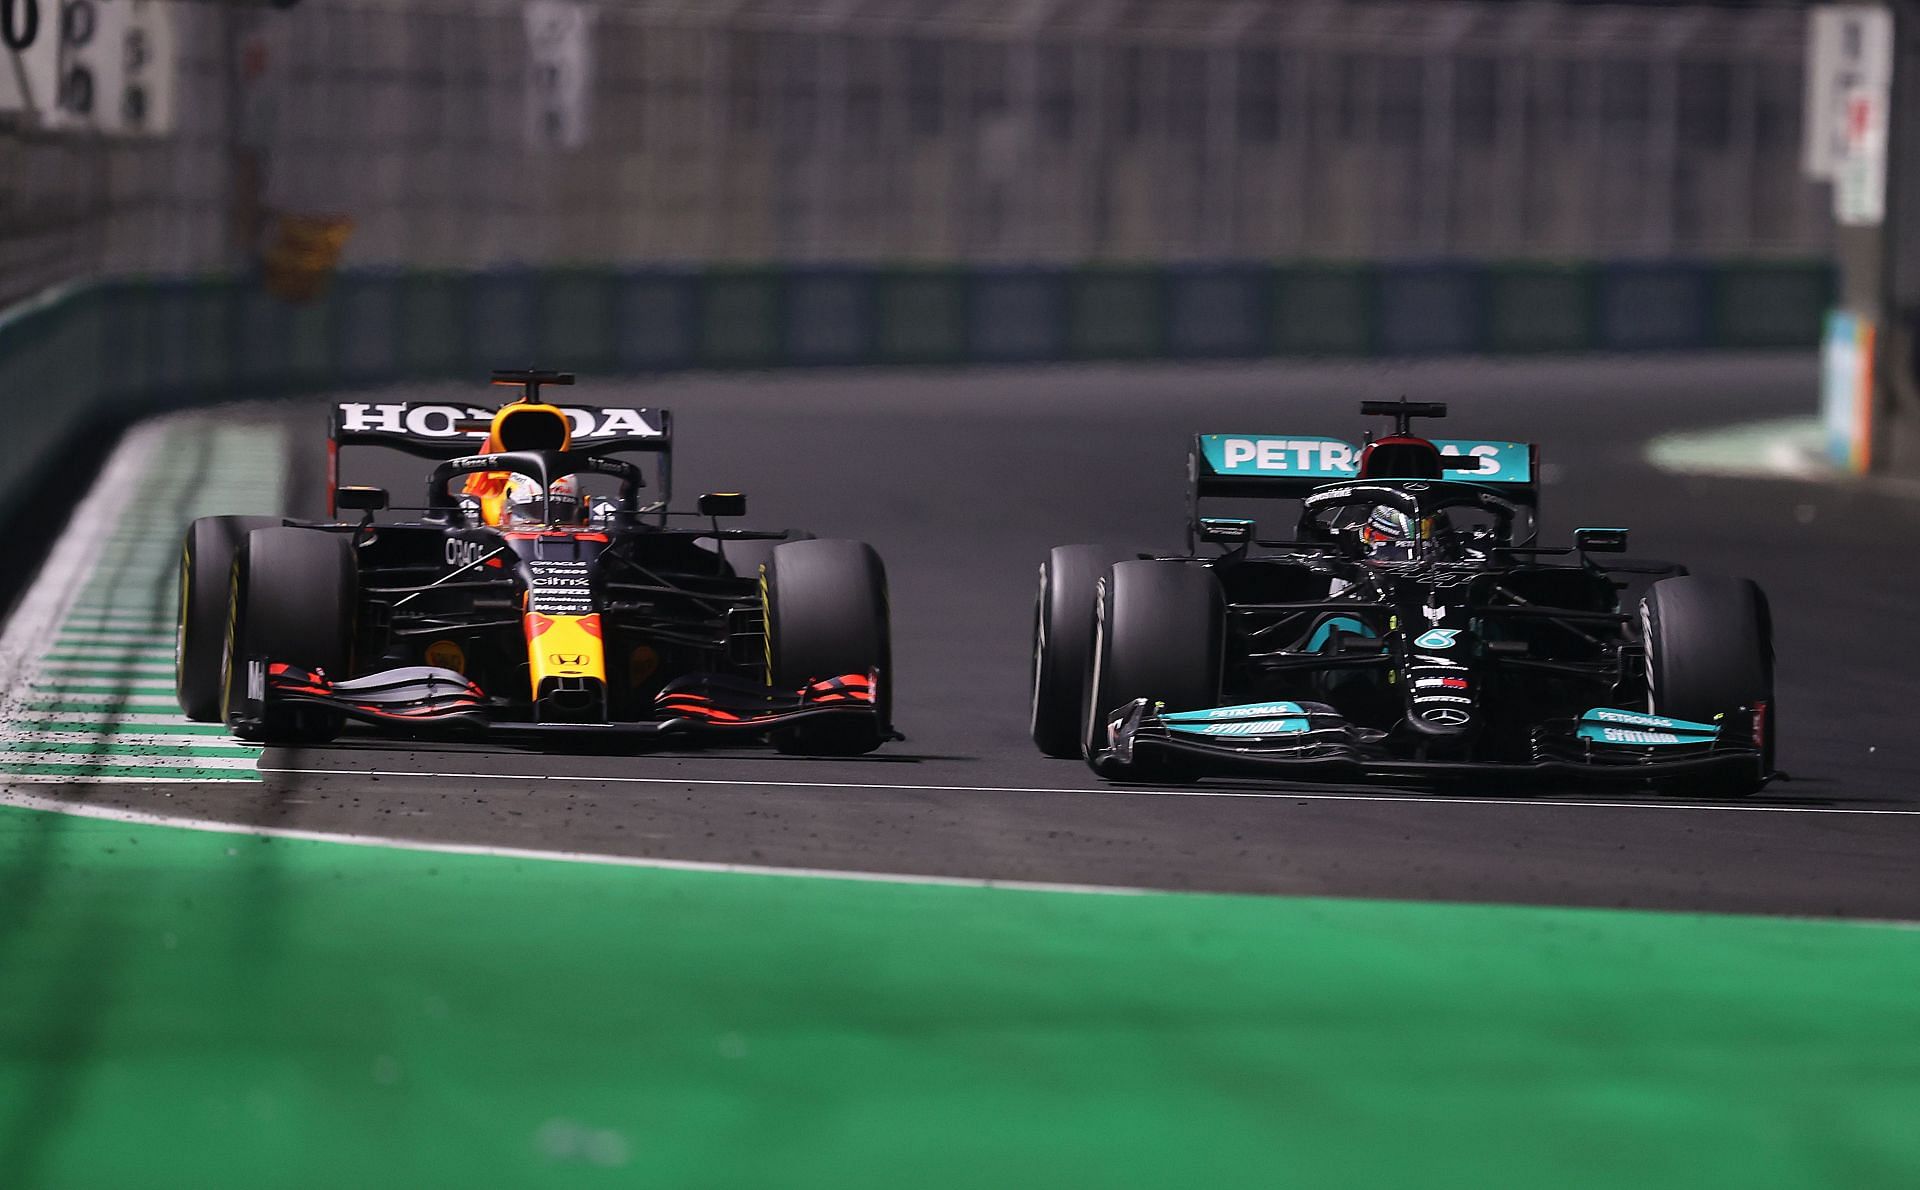 Max Verstappen (left) and Lewis Hamilton (right) at the Saudi Arabian GP. Image courtesy: Lars Baron/Getty Images